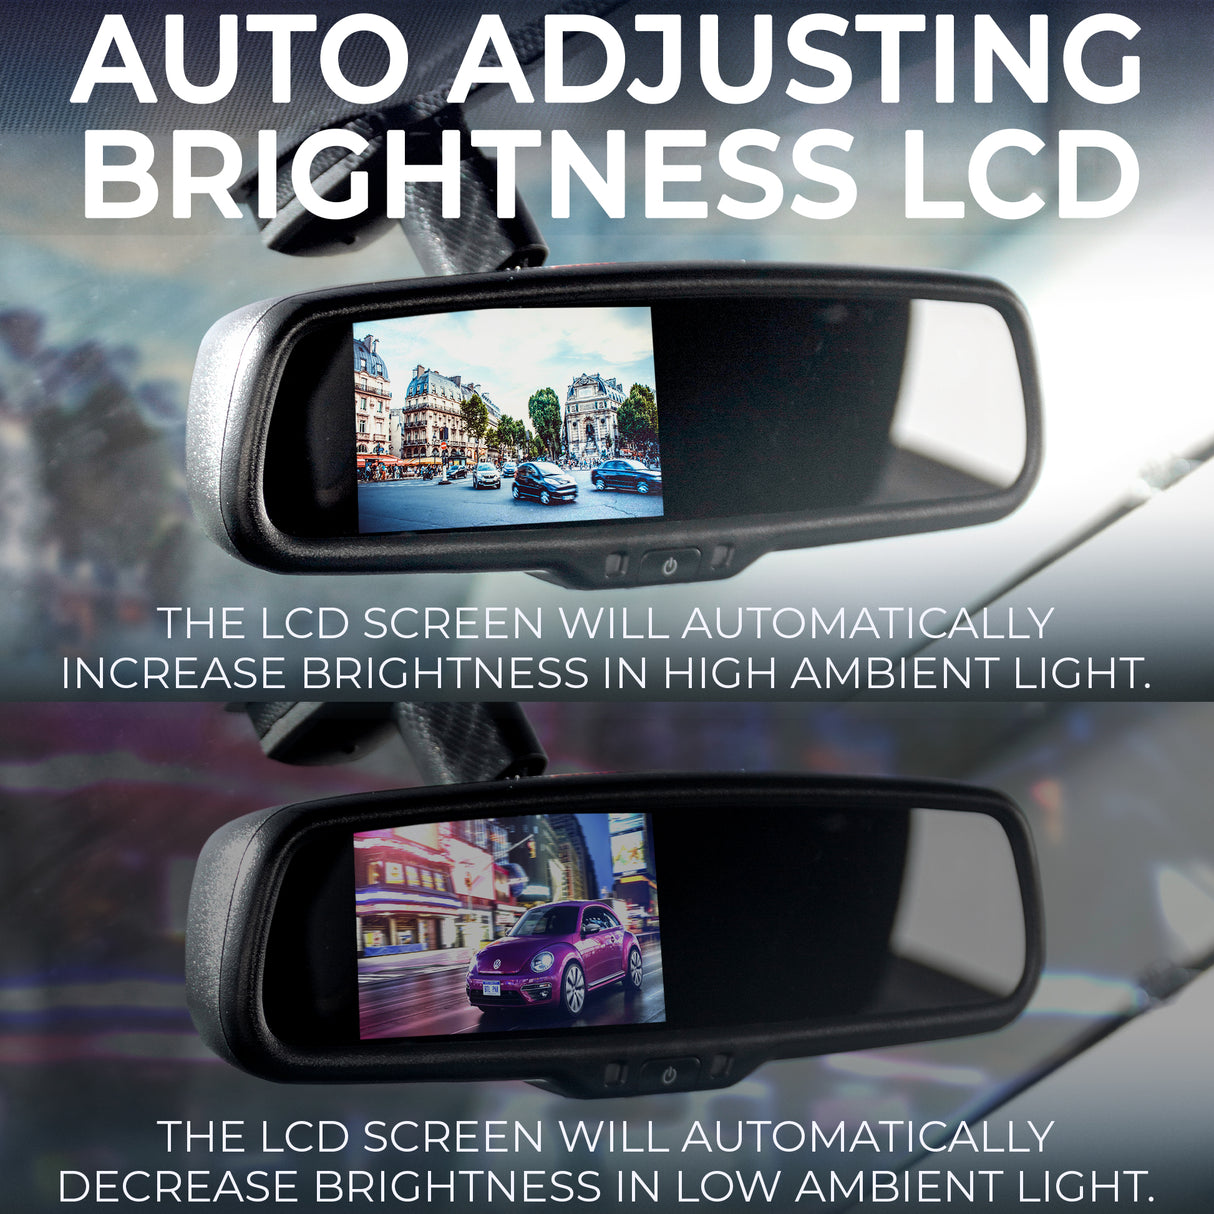 Master Tailgaters 10.5" OEM Rear View Mirror with 4.3" LCD Screen + Auto Dimming Mirror | Ultra Bright | Rearview Universal Fit | Auto Adjusting Brightness LCD | Anti Glare | Full Mirror Replacement